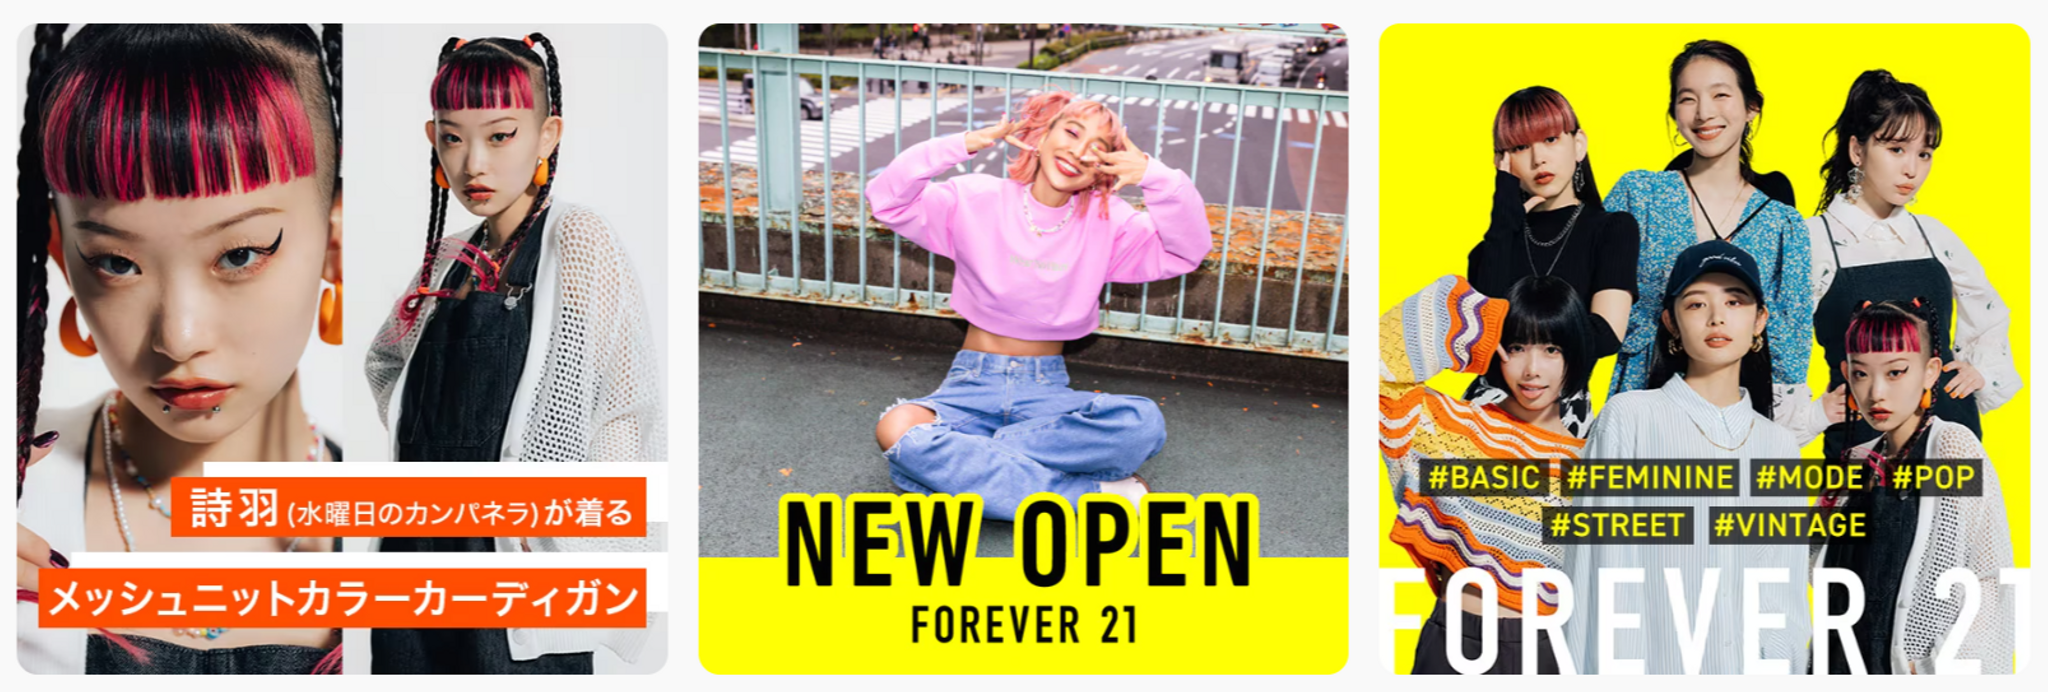 Forever 21 repositions to target Japan's fashionistas